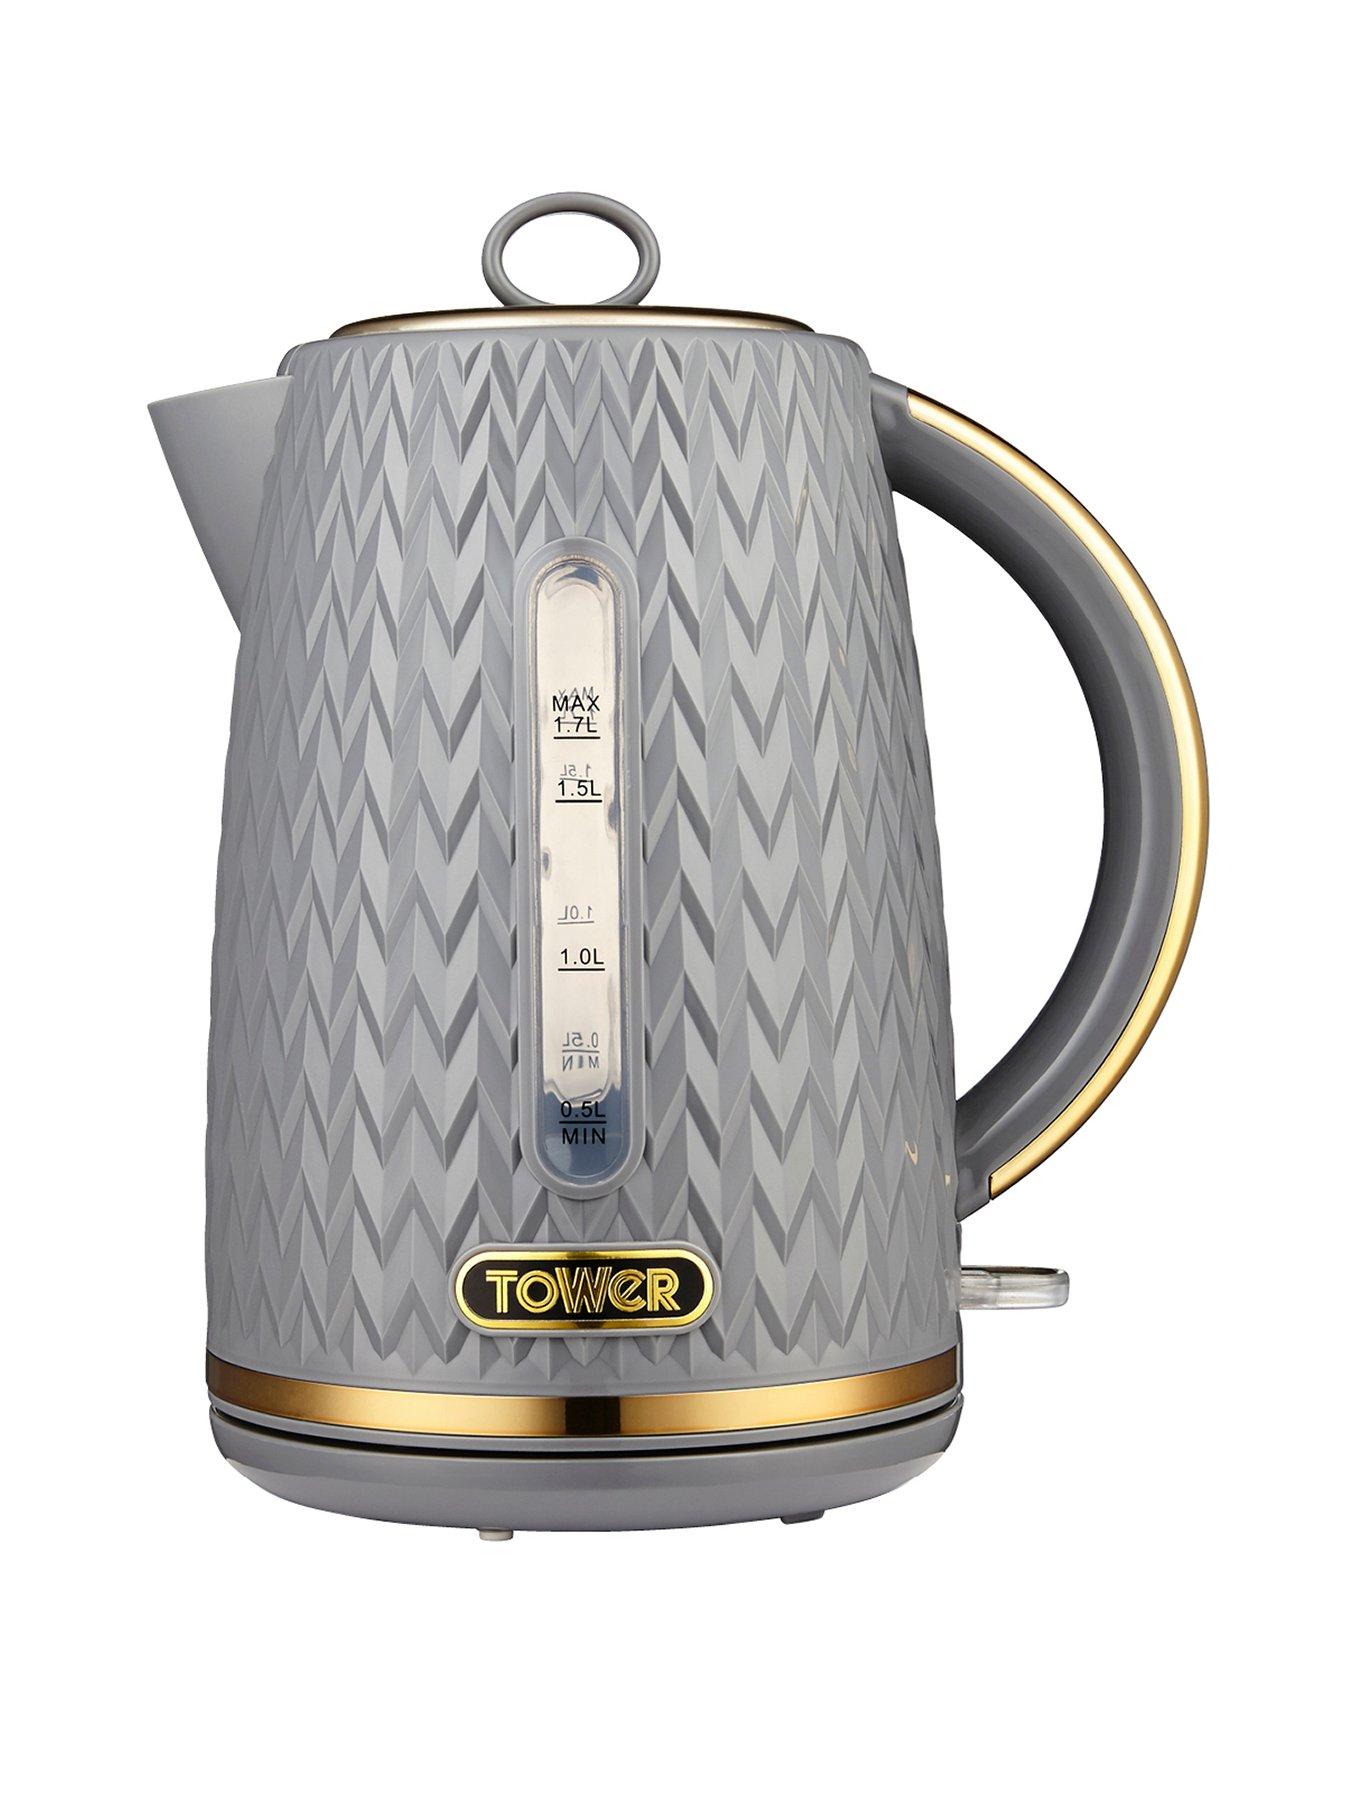 Smeg KLF03 Retro-style Electric Kettle - Navy Color - New In Box